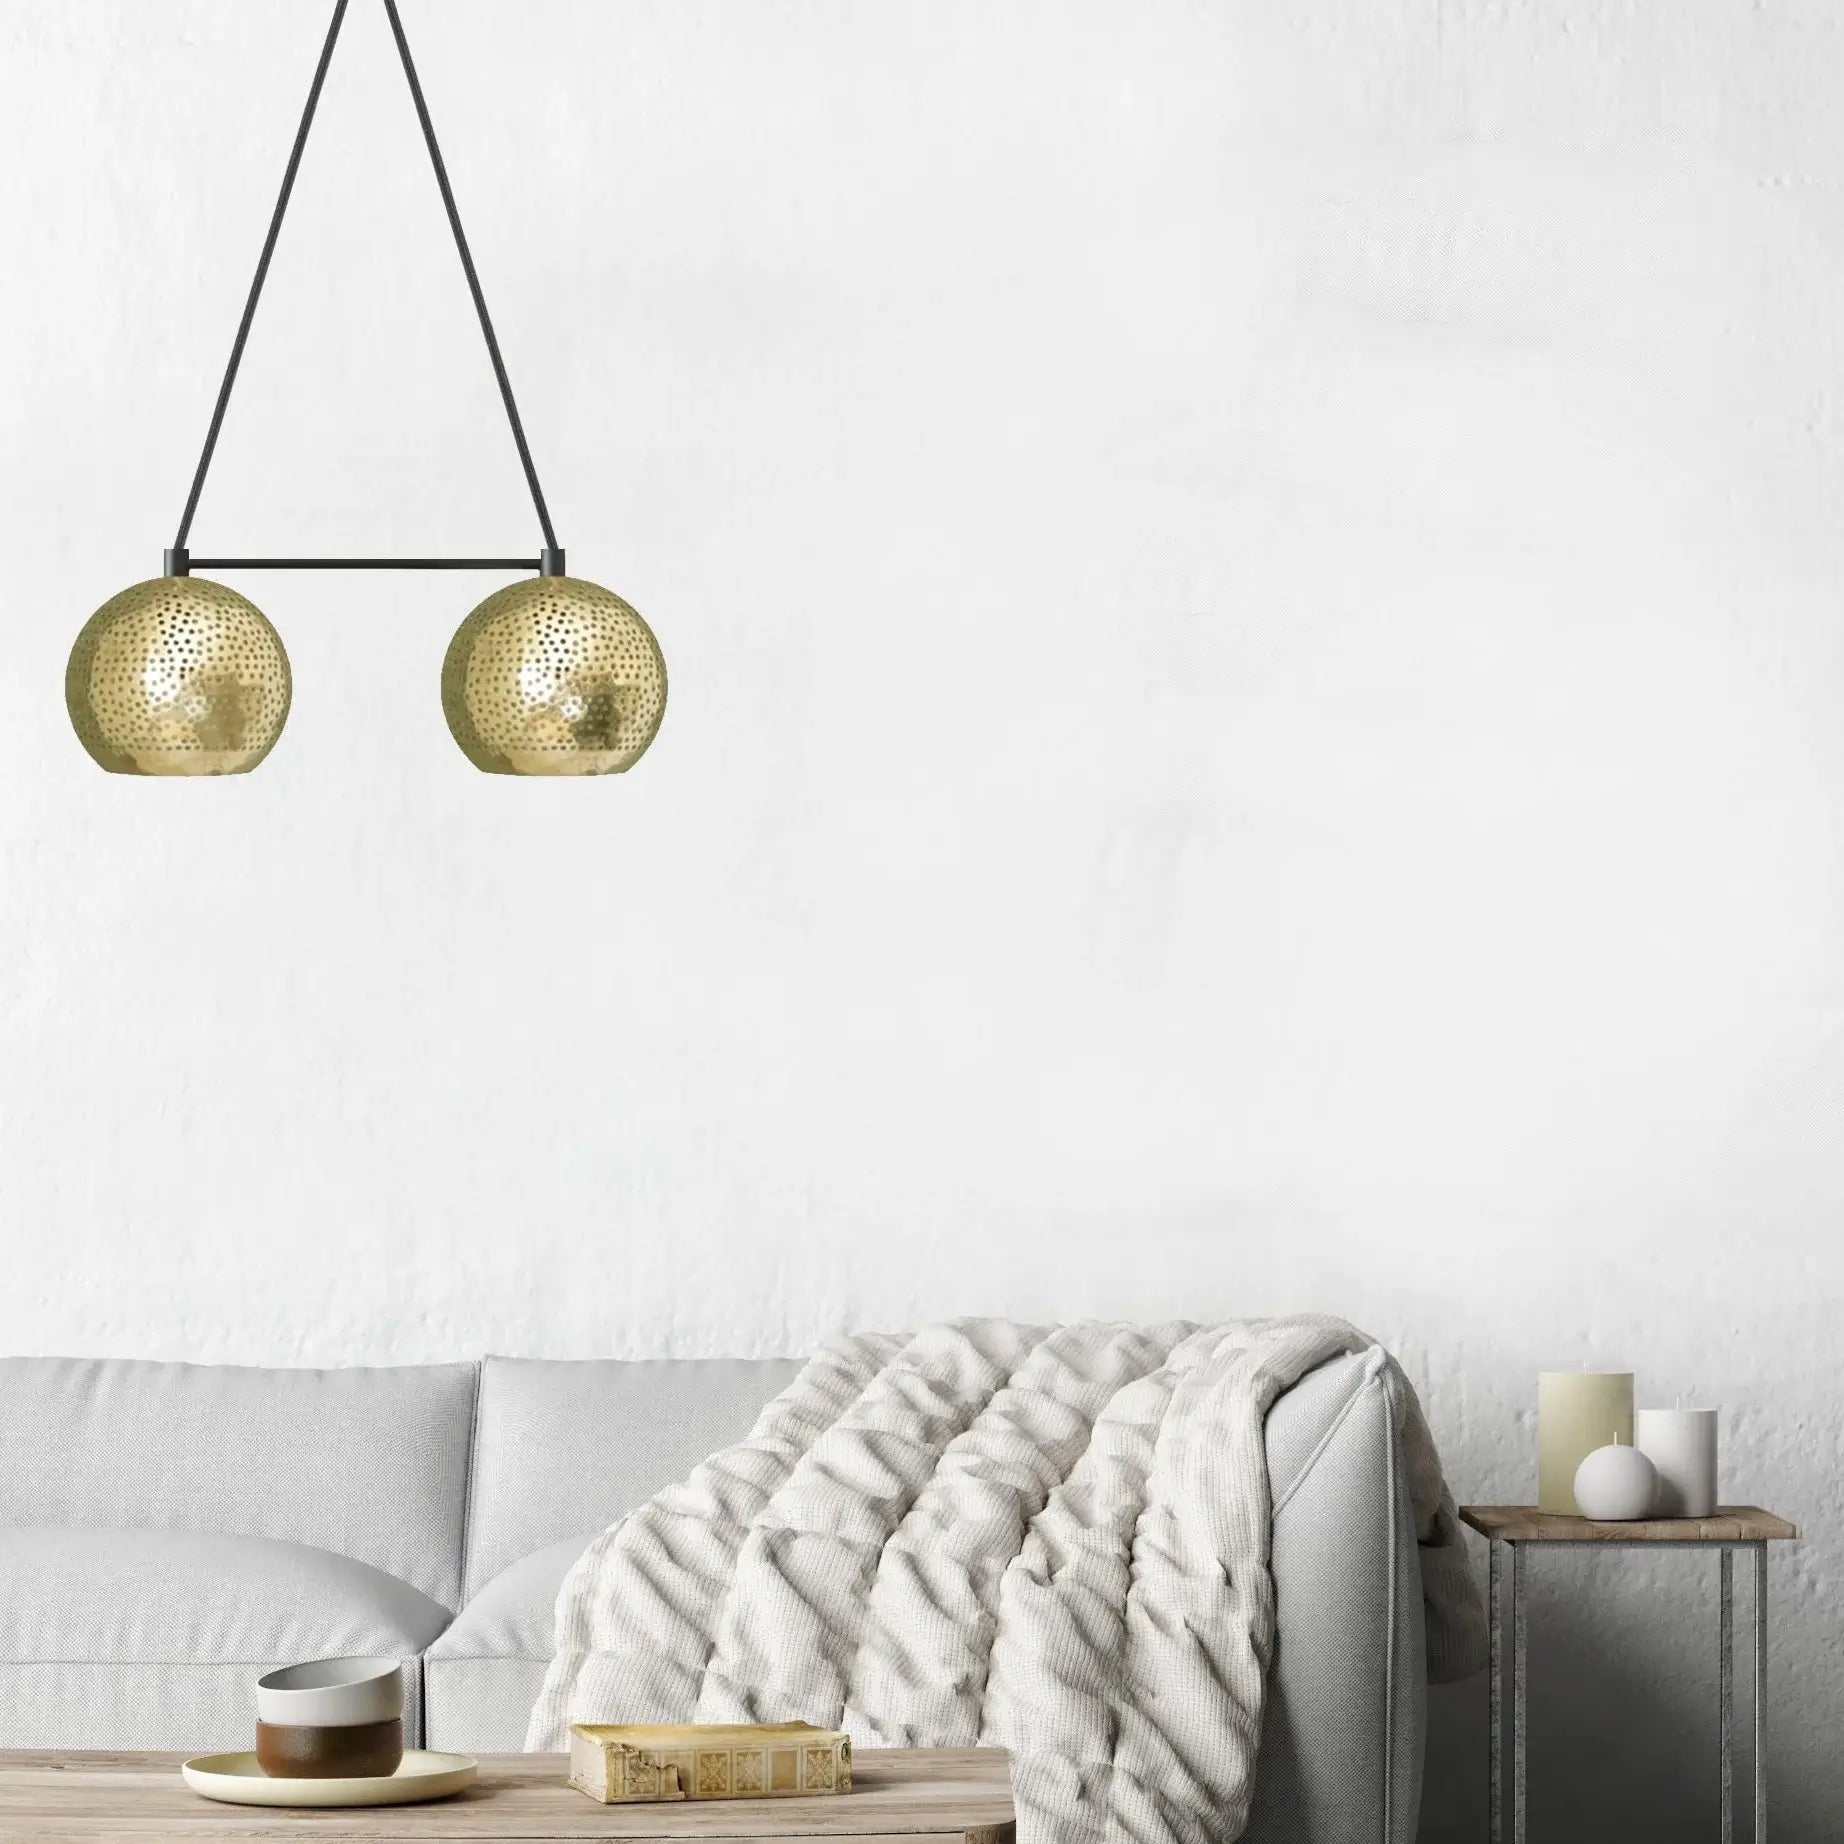 Dounia home Chandelier in Polished brass made of Metal,  used as a living room lighting,  Model: Shams